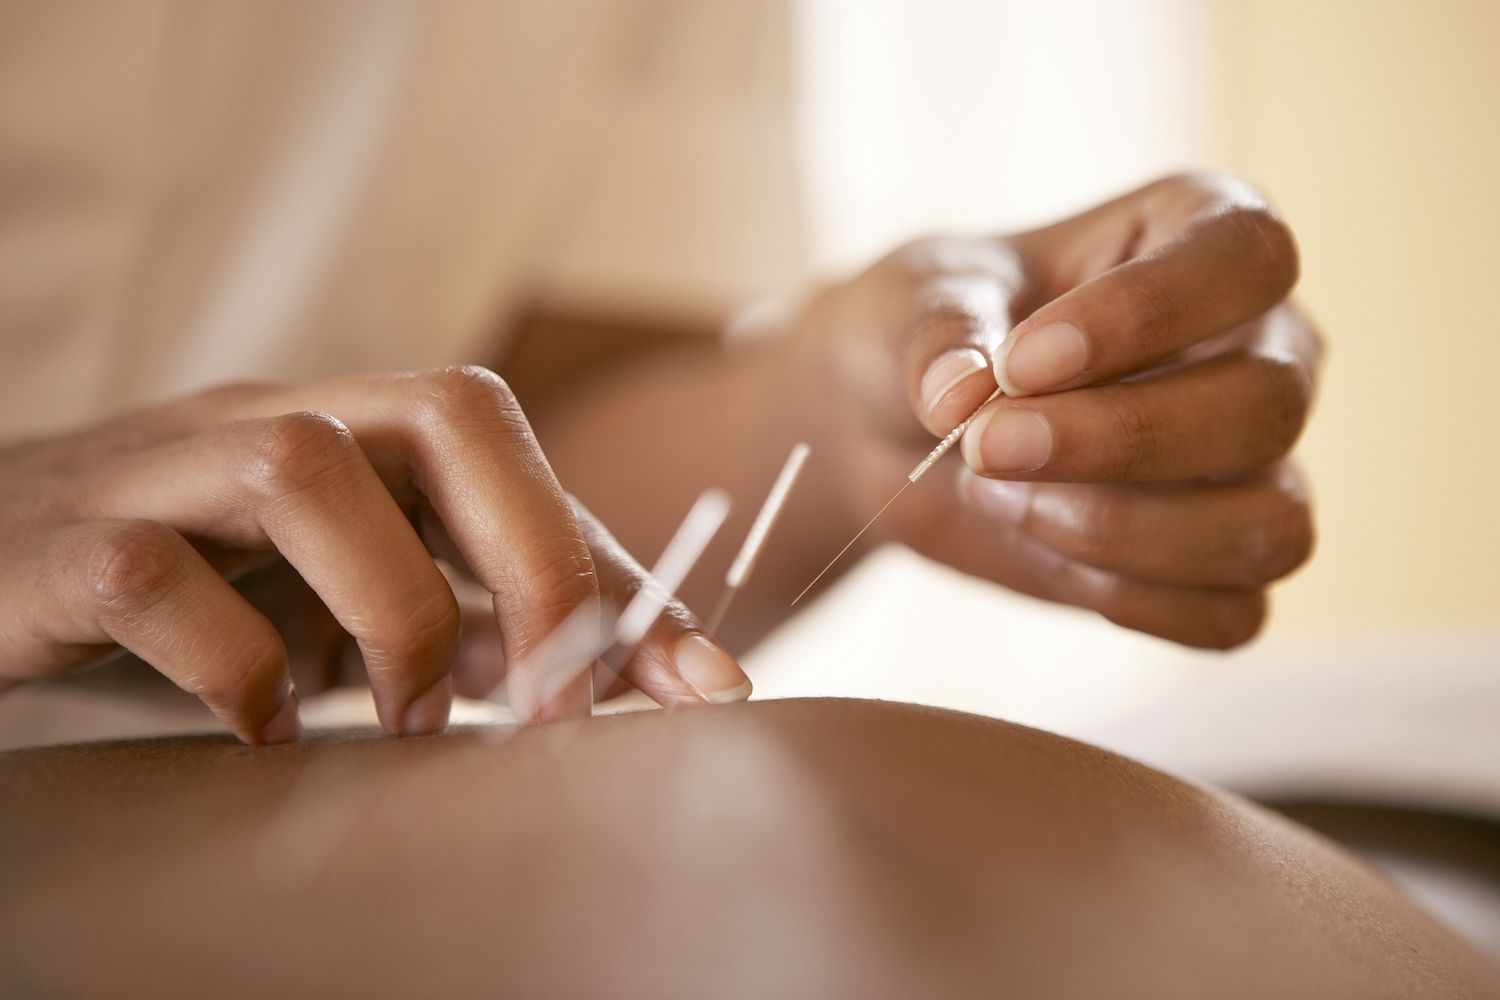 Acupuncture: The Benefits, How It Works, and Side Effects